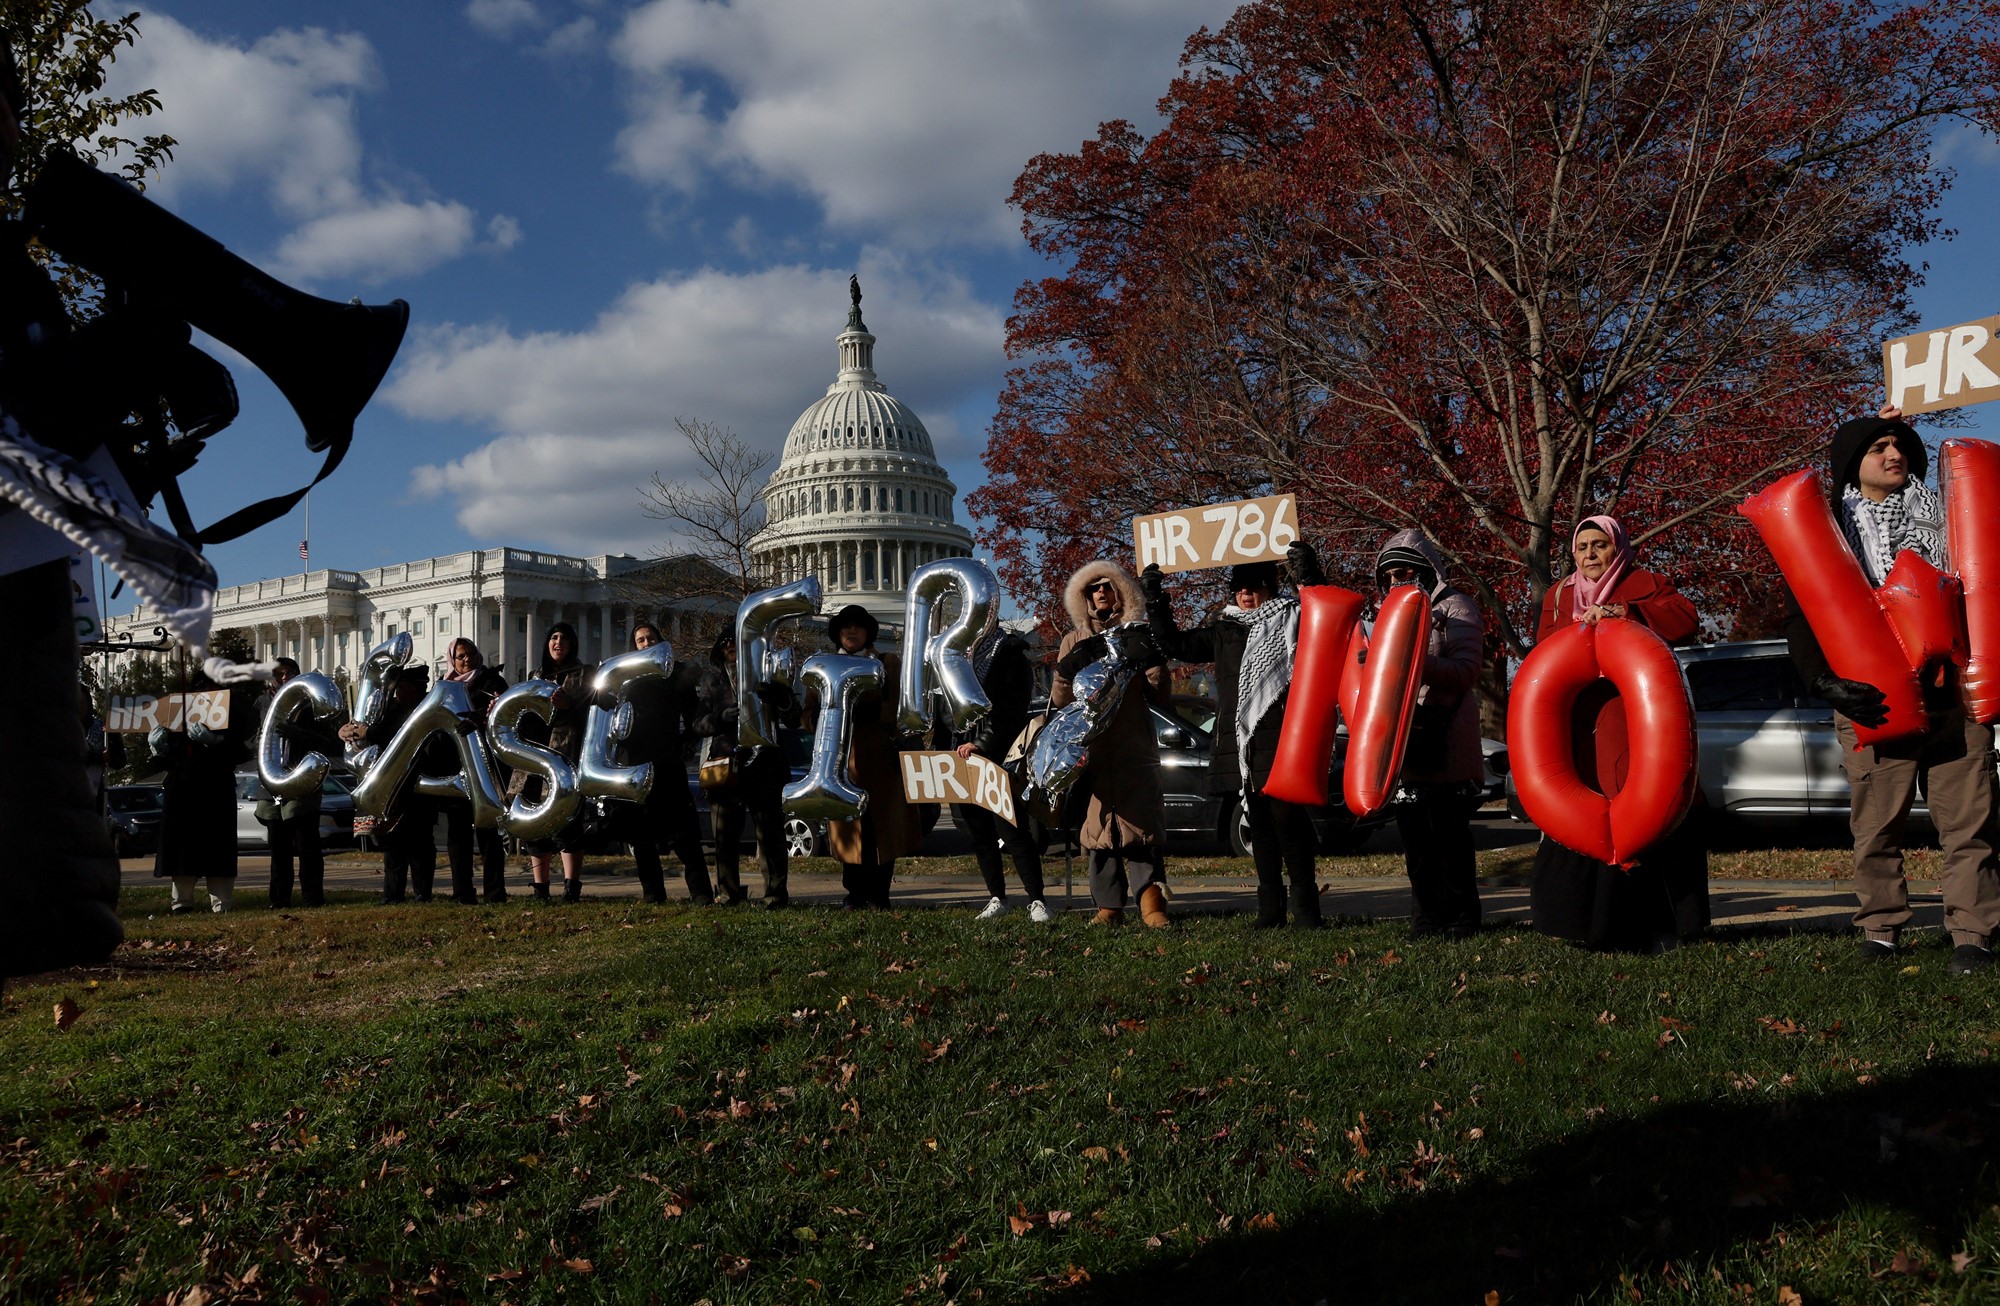 People holding inflated letters which spell CEASEFIRE NOW, outside the Capitol building in Washington DC